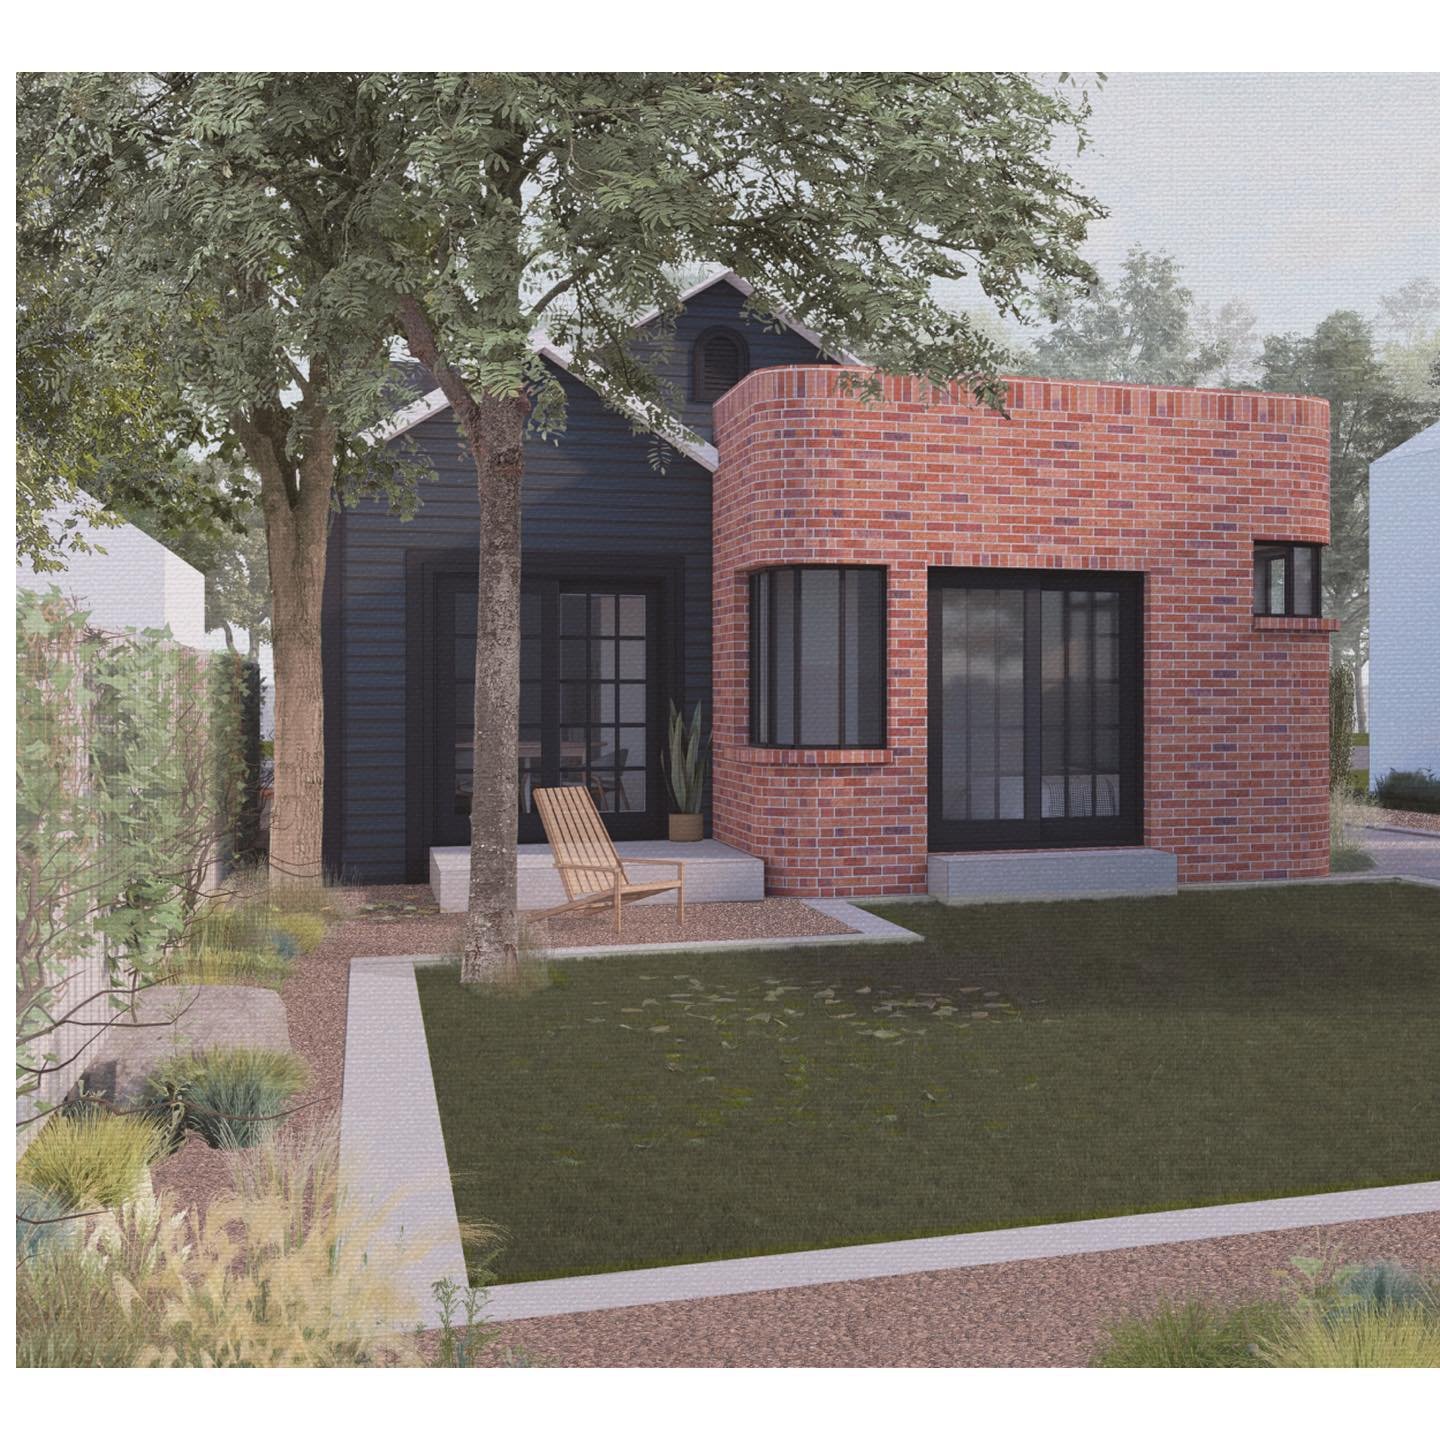 This design is for an en-suite addition and detached screened porch. We rounded the brick corners to get a softer feel and open up the view from the dining room to the backyard.